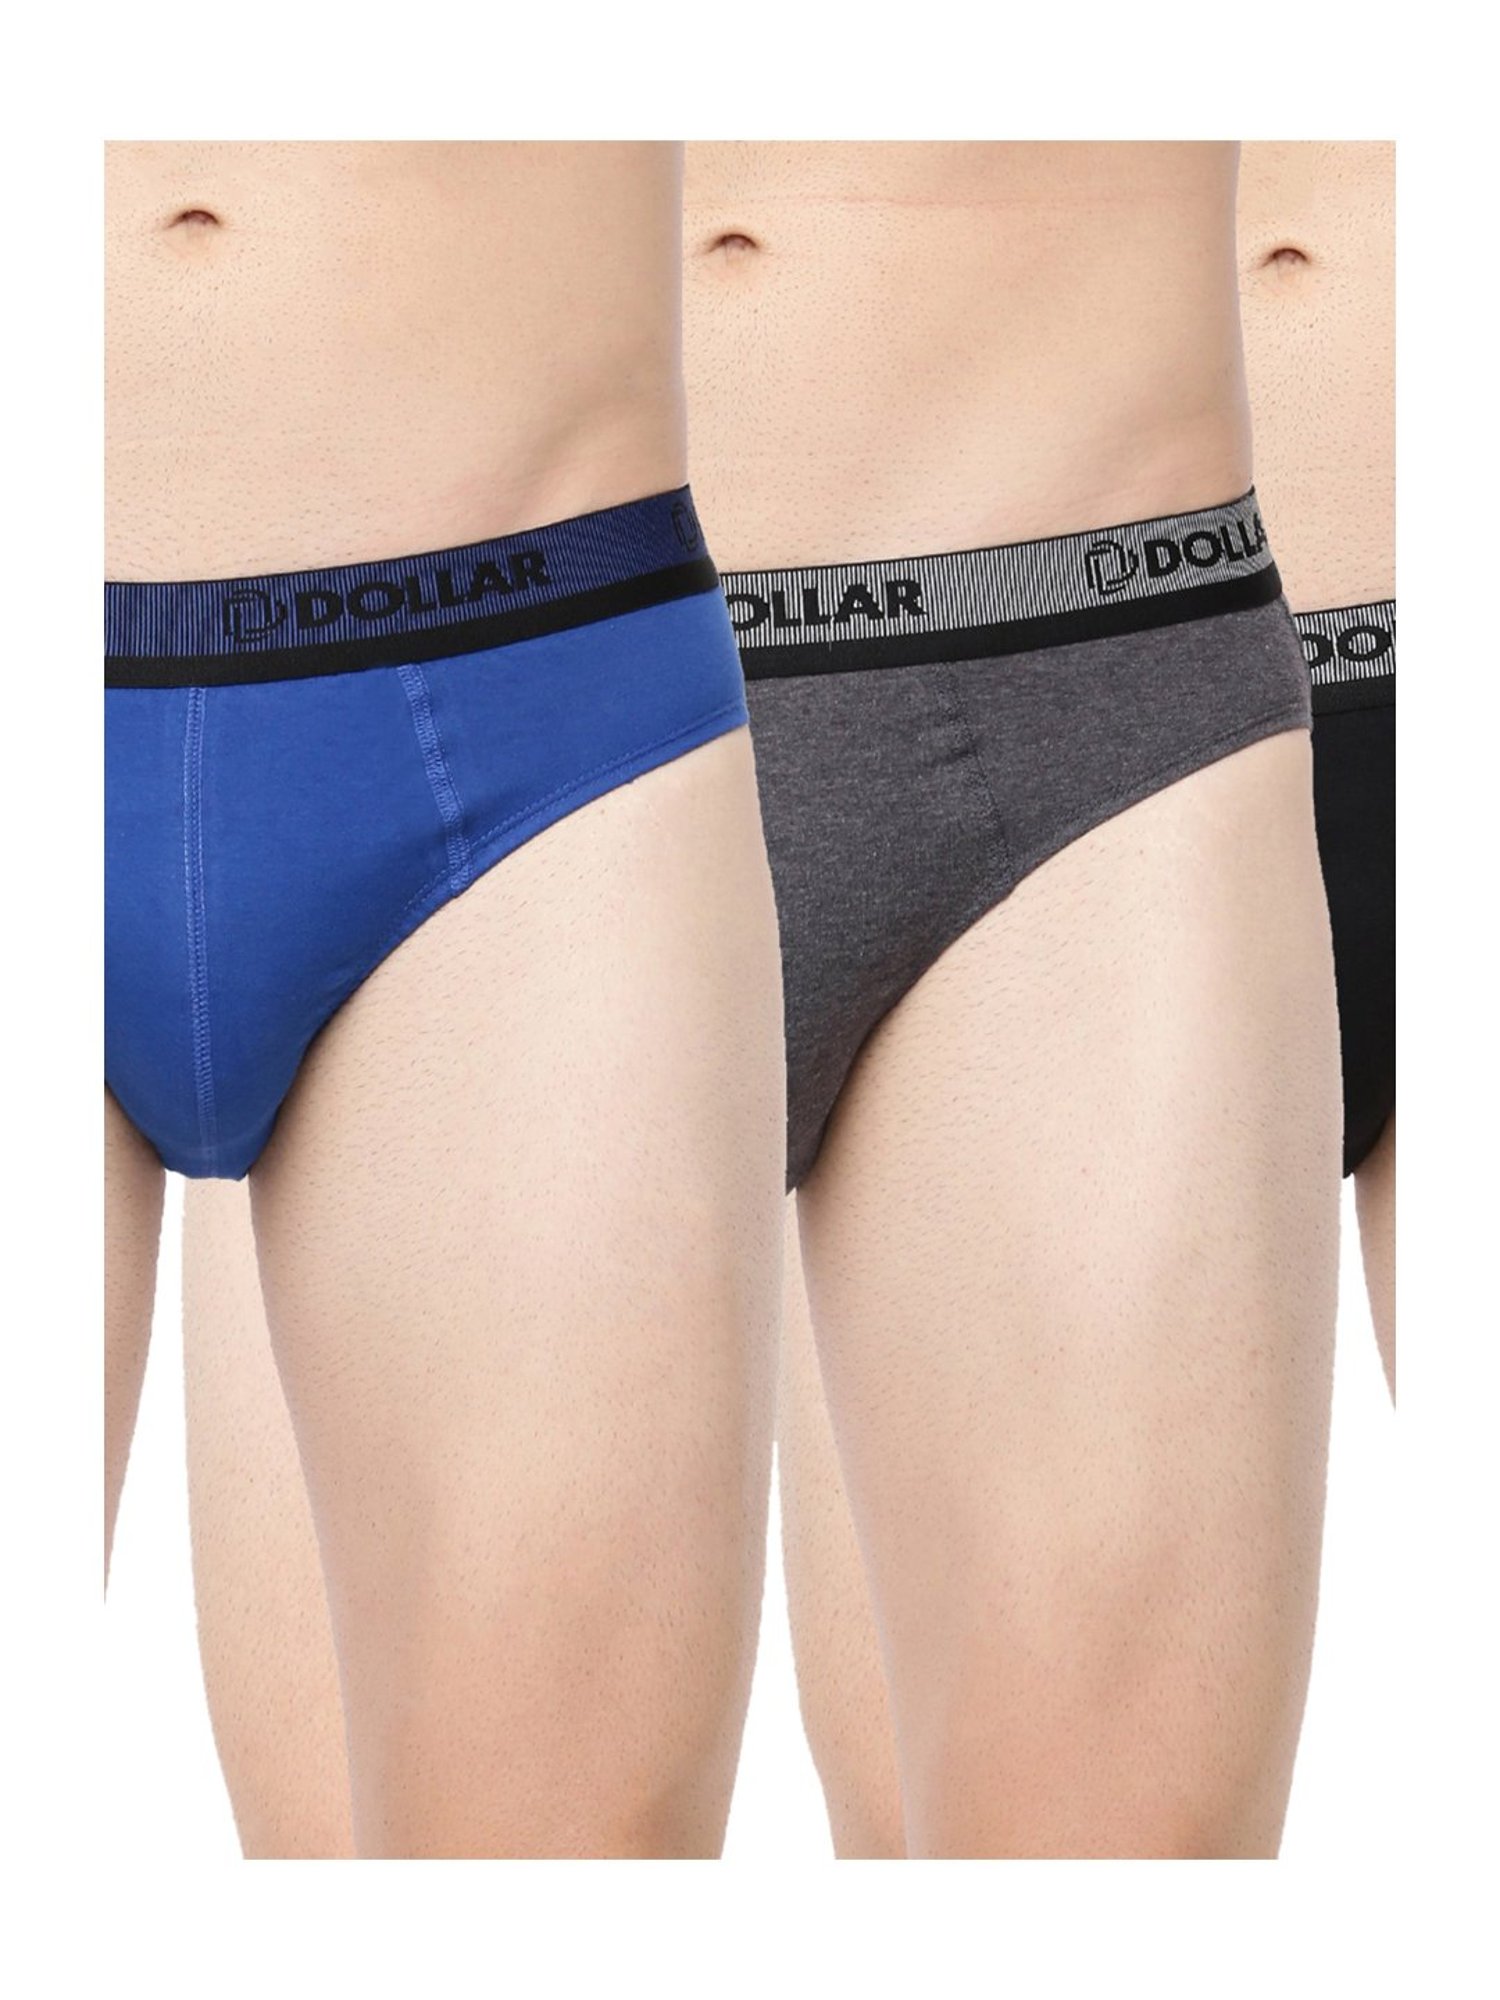 Buy U.S. POLO ASSN. Mens Solid Cotton Mid Rise Briefs Multi-Color (Pack of  2) Online